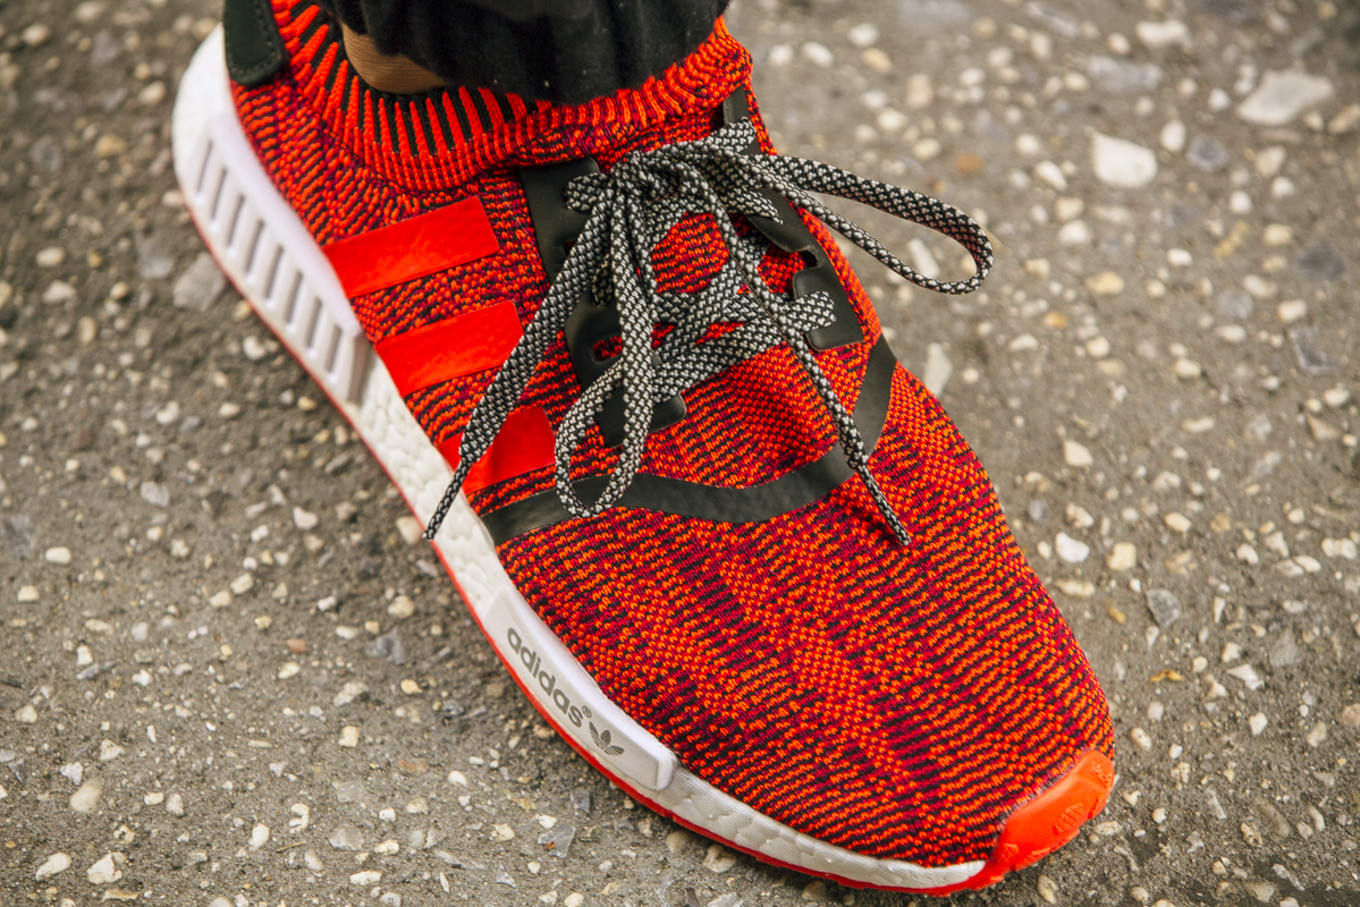 nyc red apple edition nmd